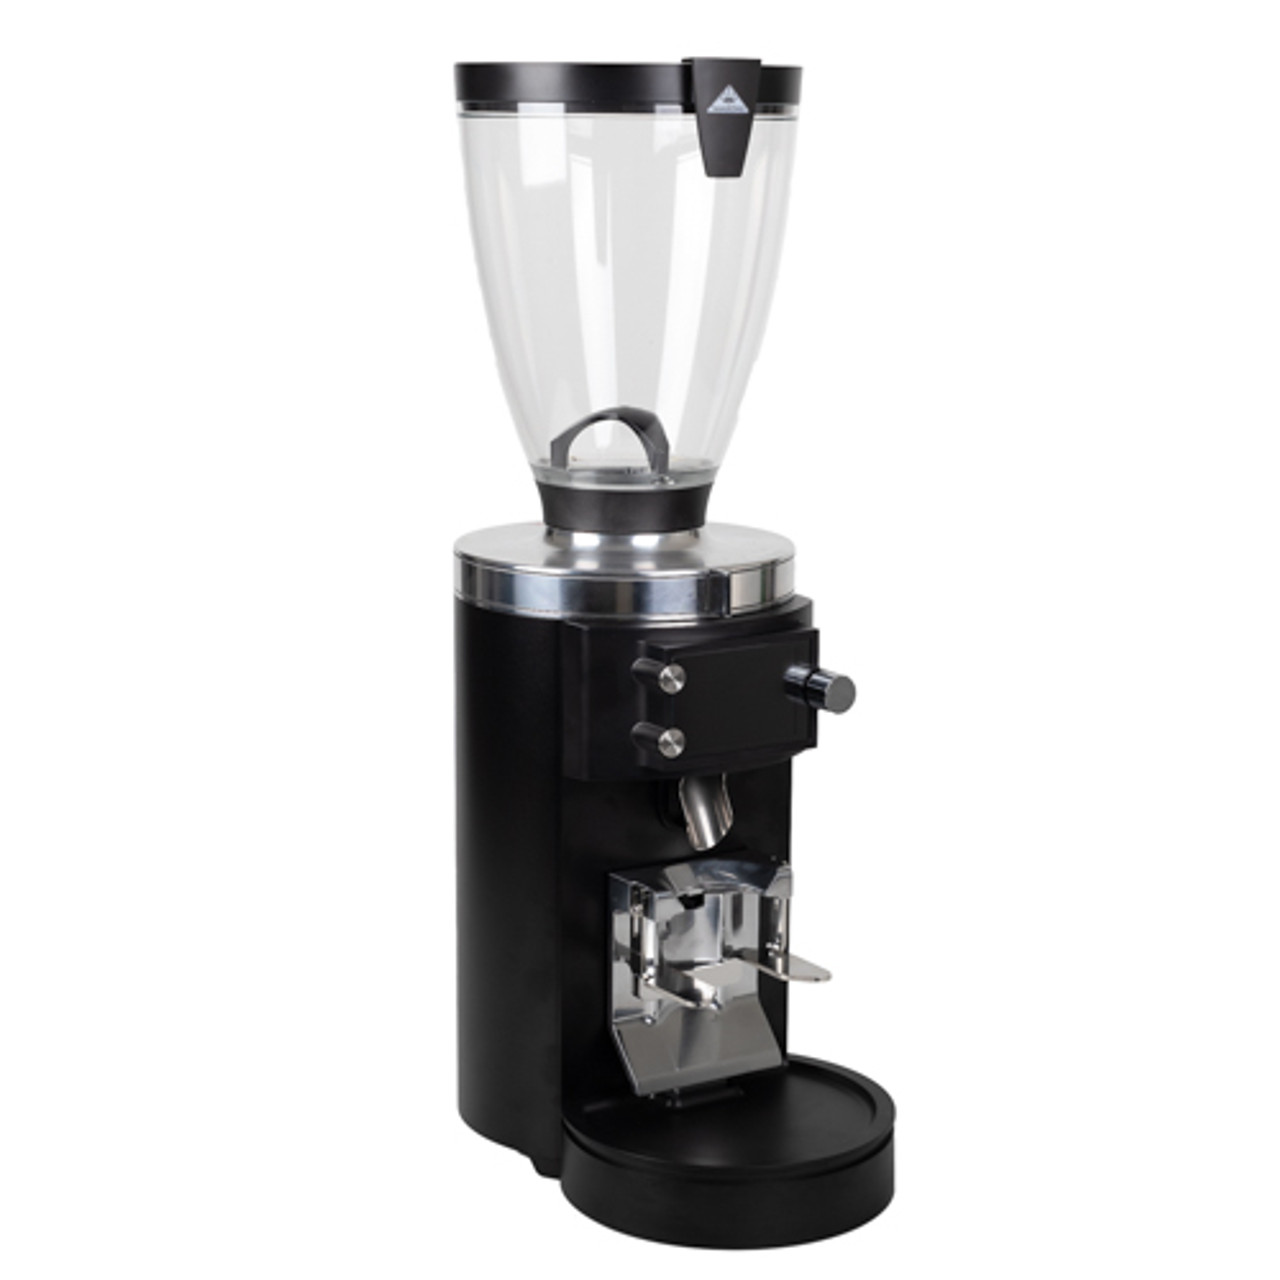 Home Commercial Espresso Coffee Grinder Burr Mill Machine Electric Grind  1200g